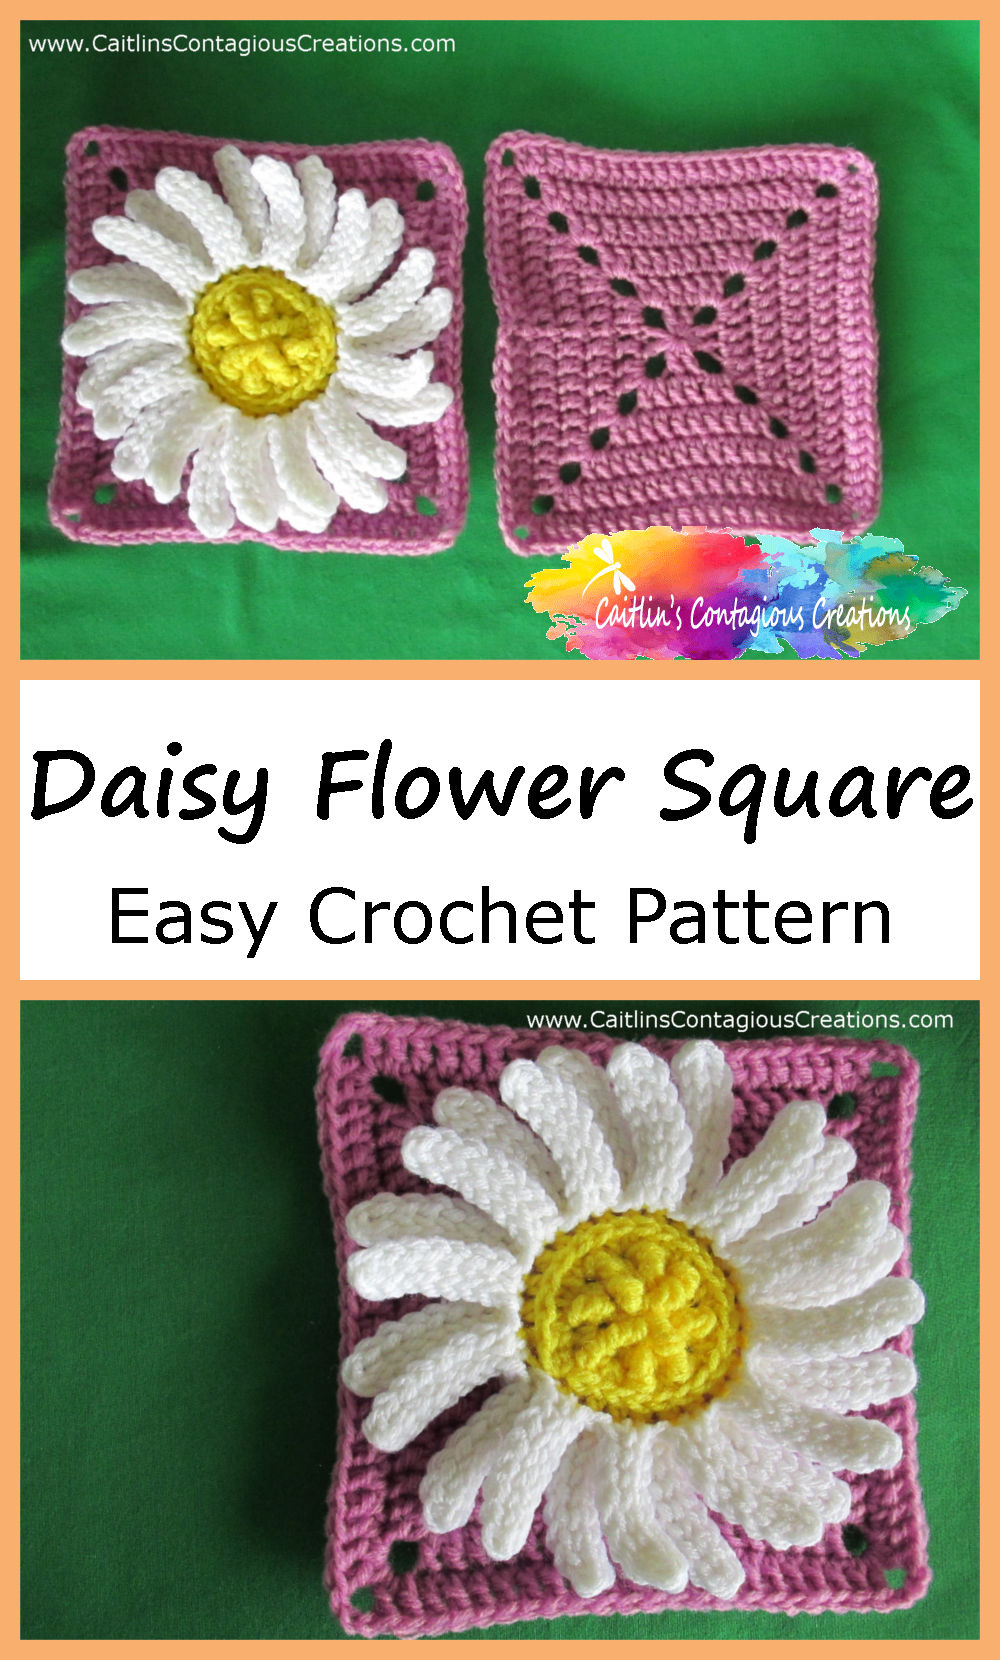 Finished daisy square and plain square on green background with text overlay Daisy Flower Square Easy Crochet Pattern